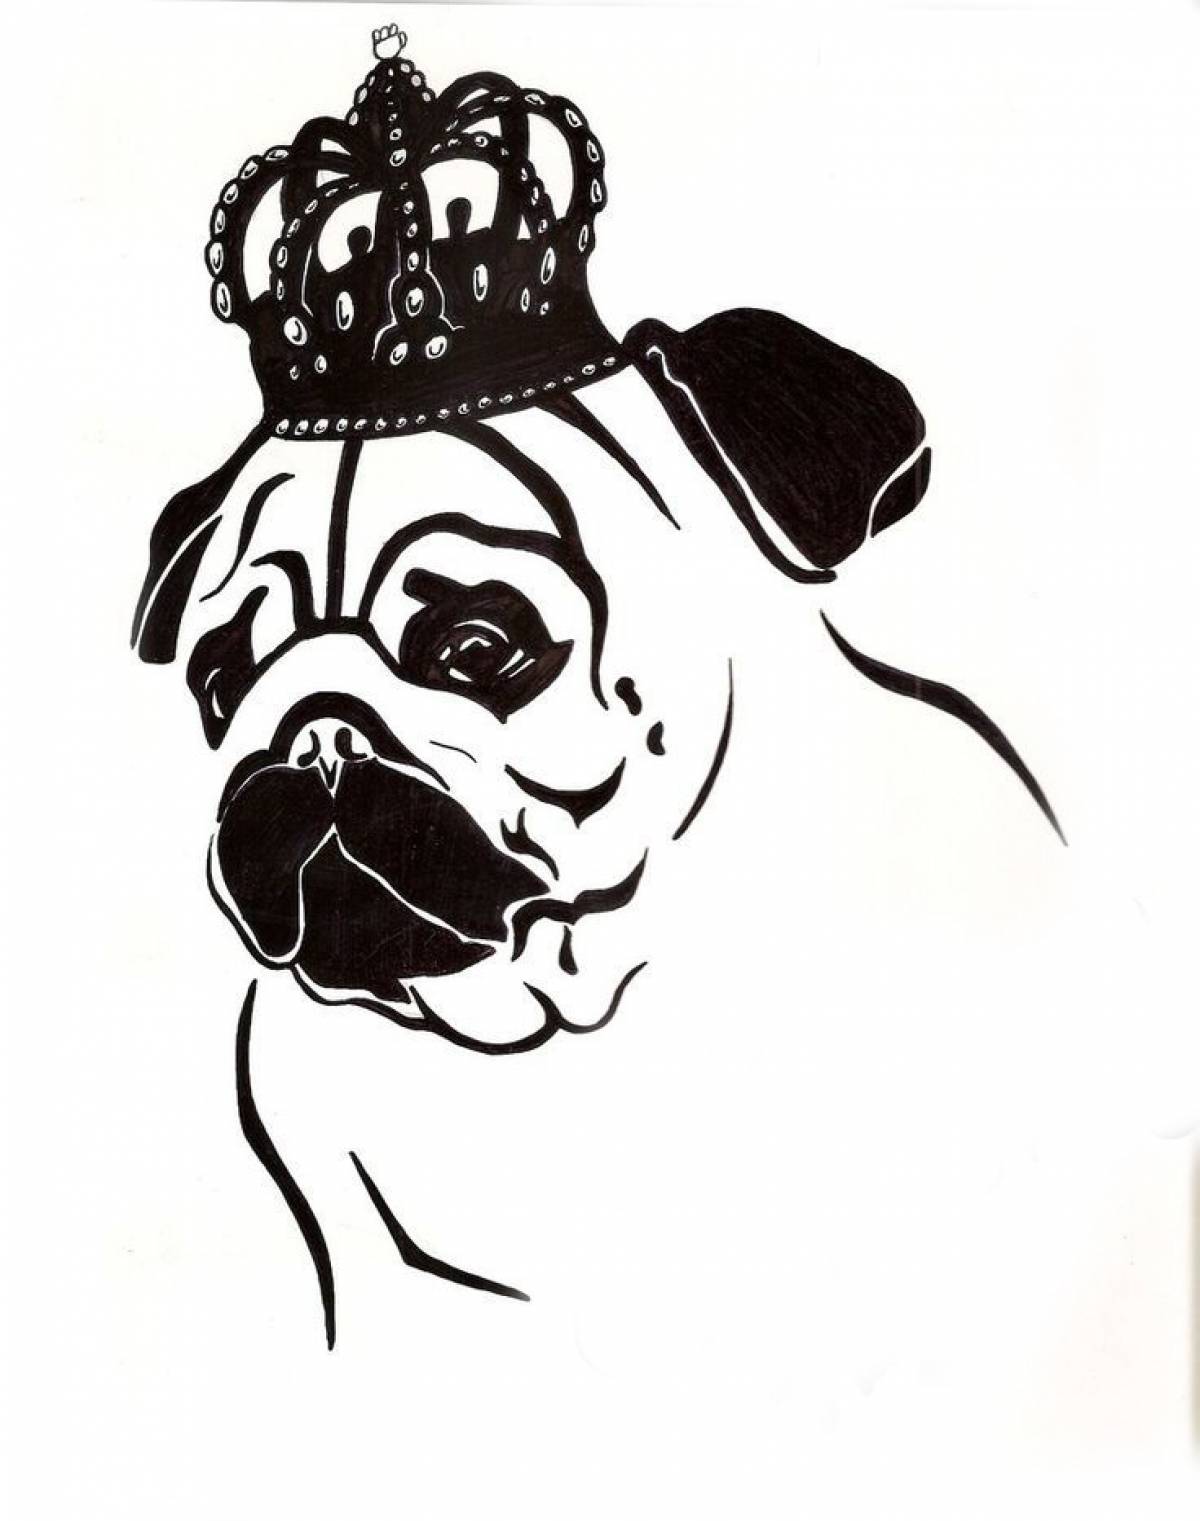 Pug in a crown